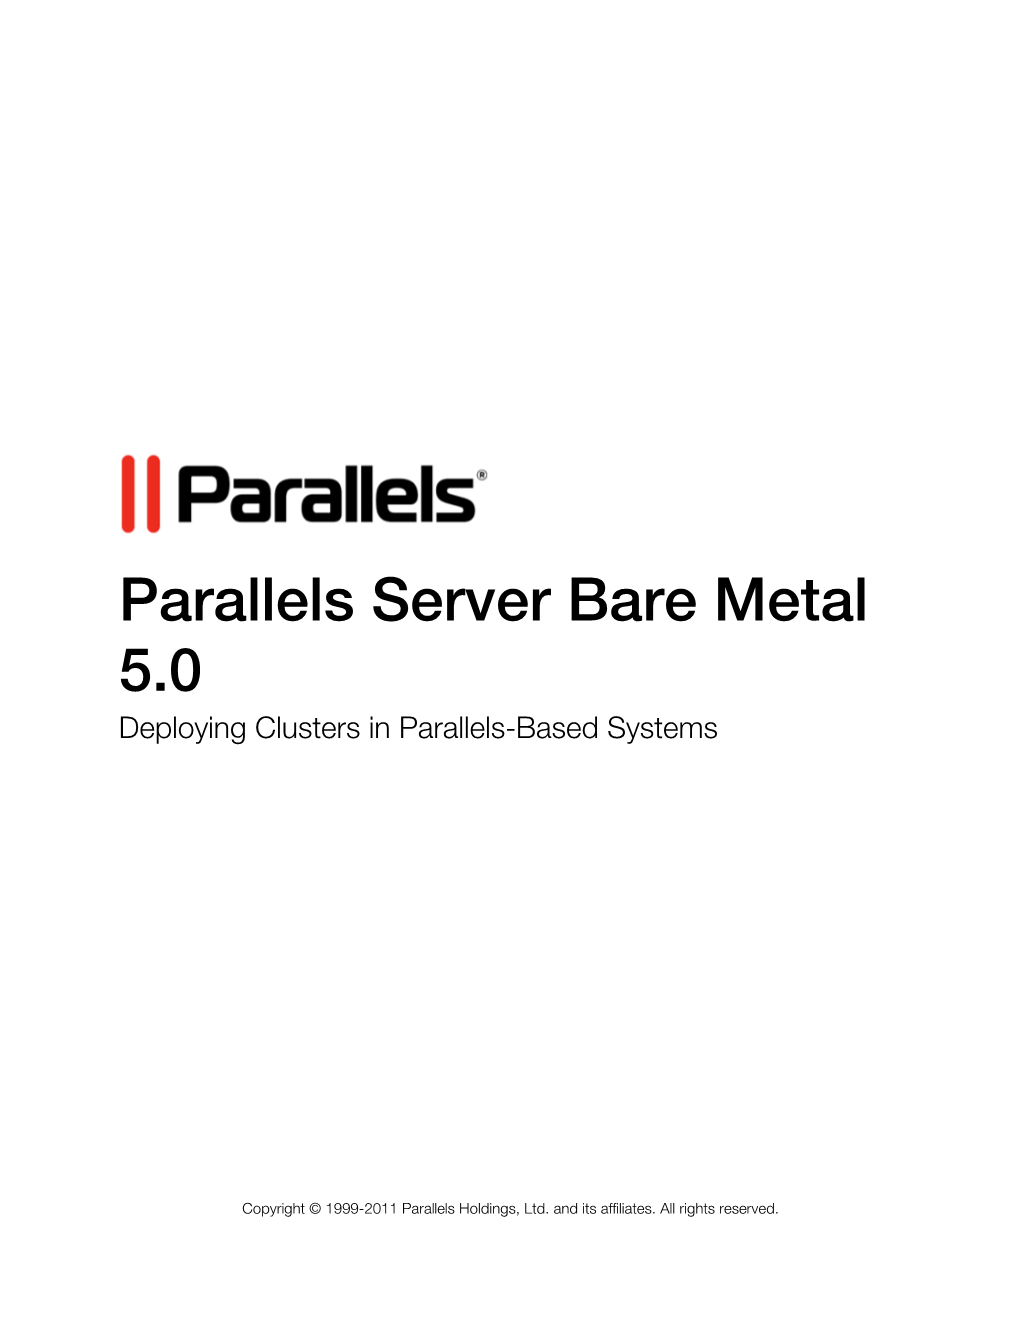 Parallels Server Bare Metal 5.0 Deploying Clusters in Parallels-Based Systems